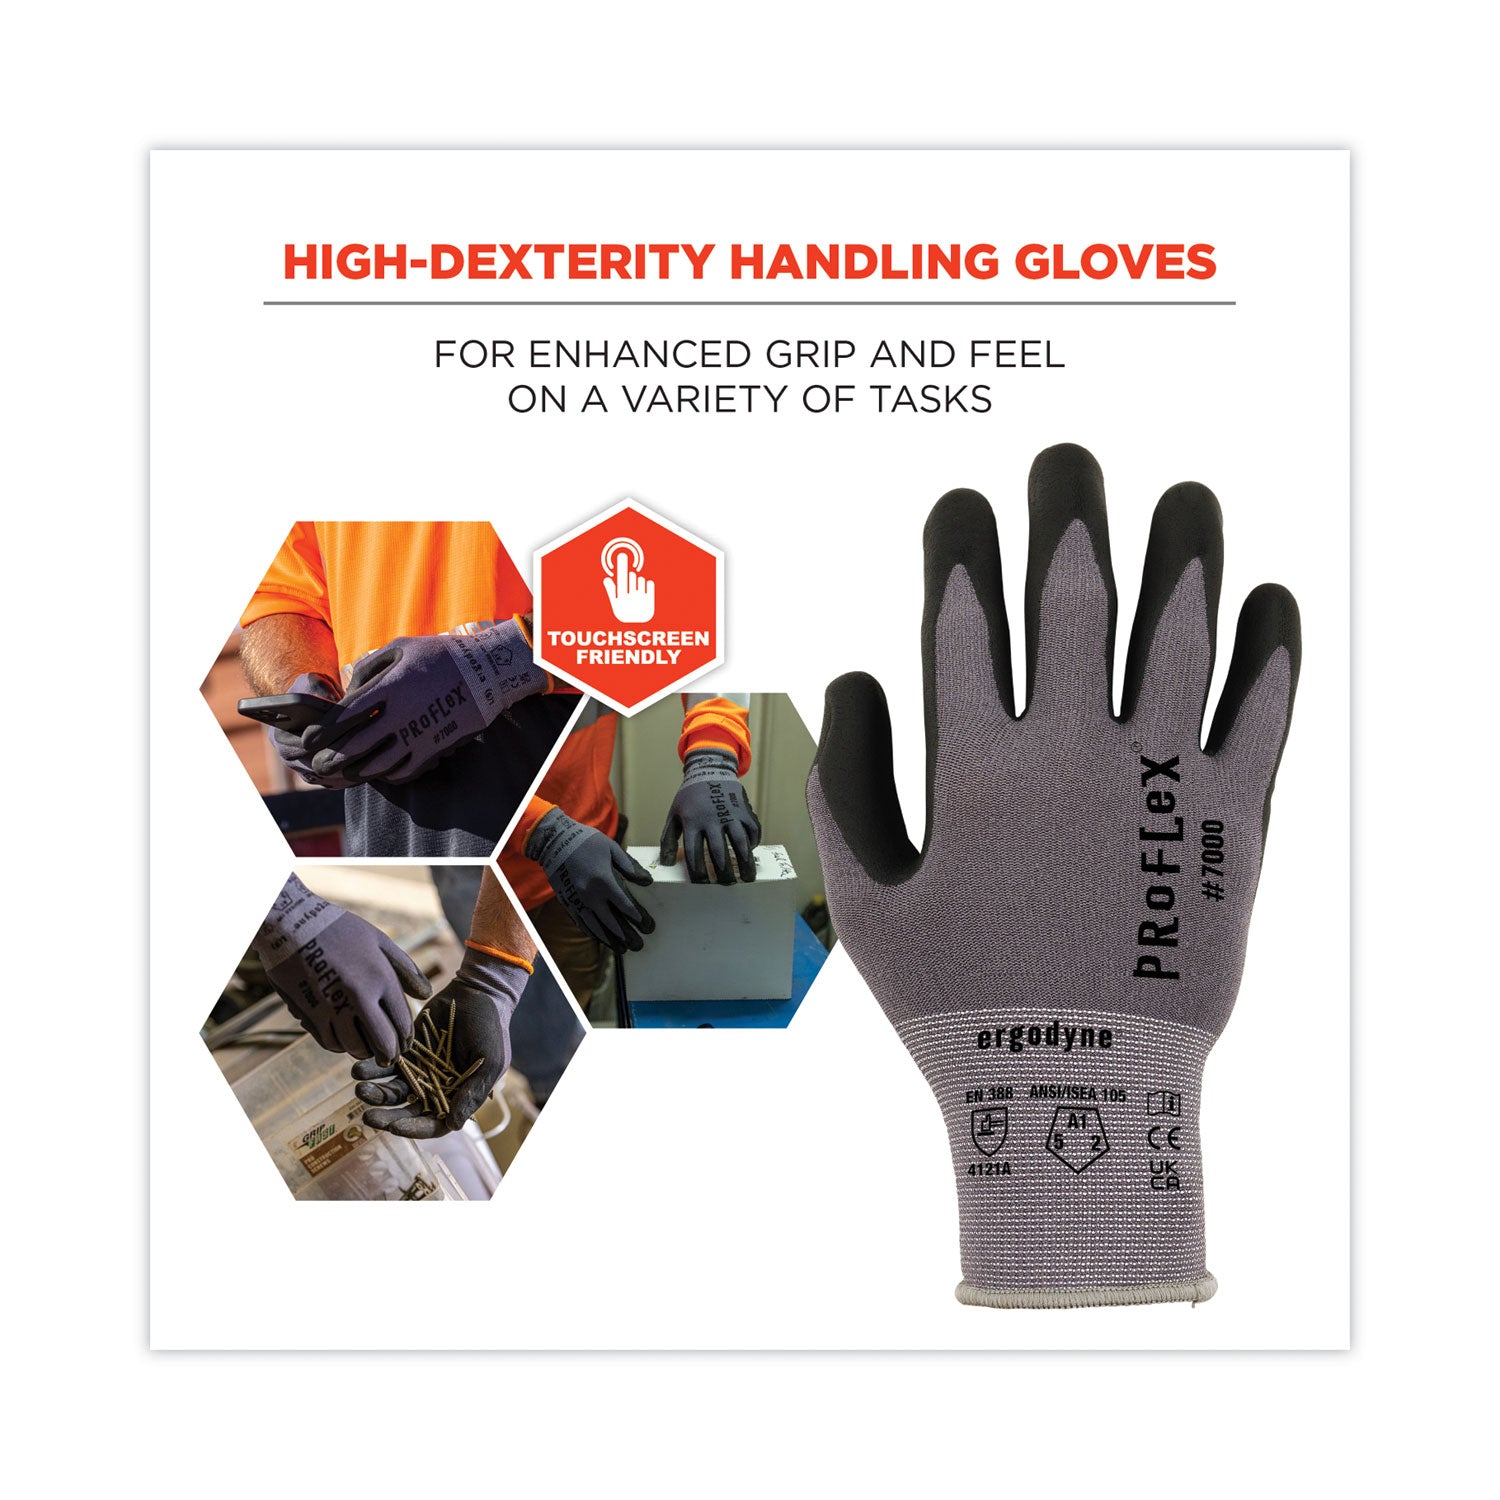 proflex-7000-nitrile-coated-gloves-microfoam-palm-gray-medium-pair-ships-in-1-3-business-days_ego10373 - 2